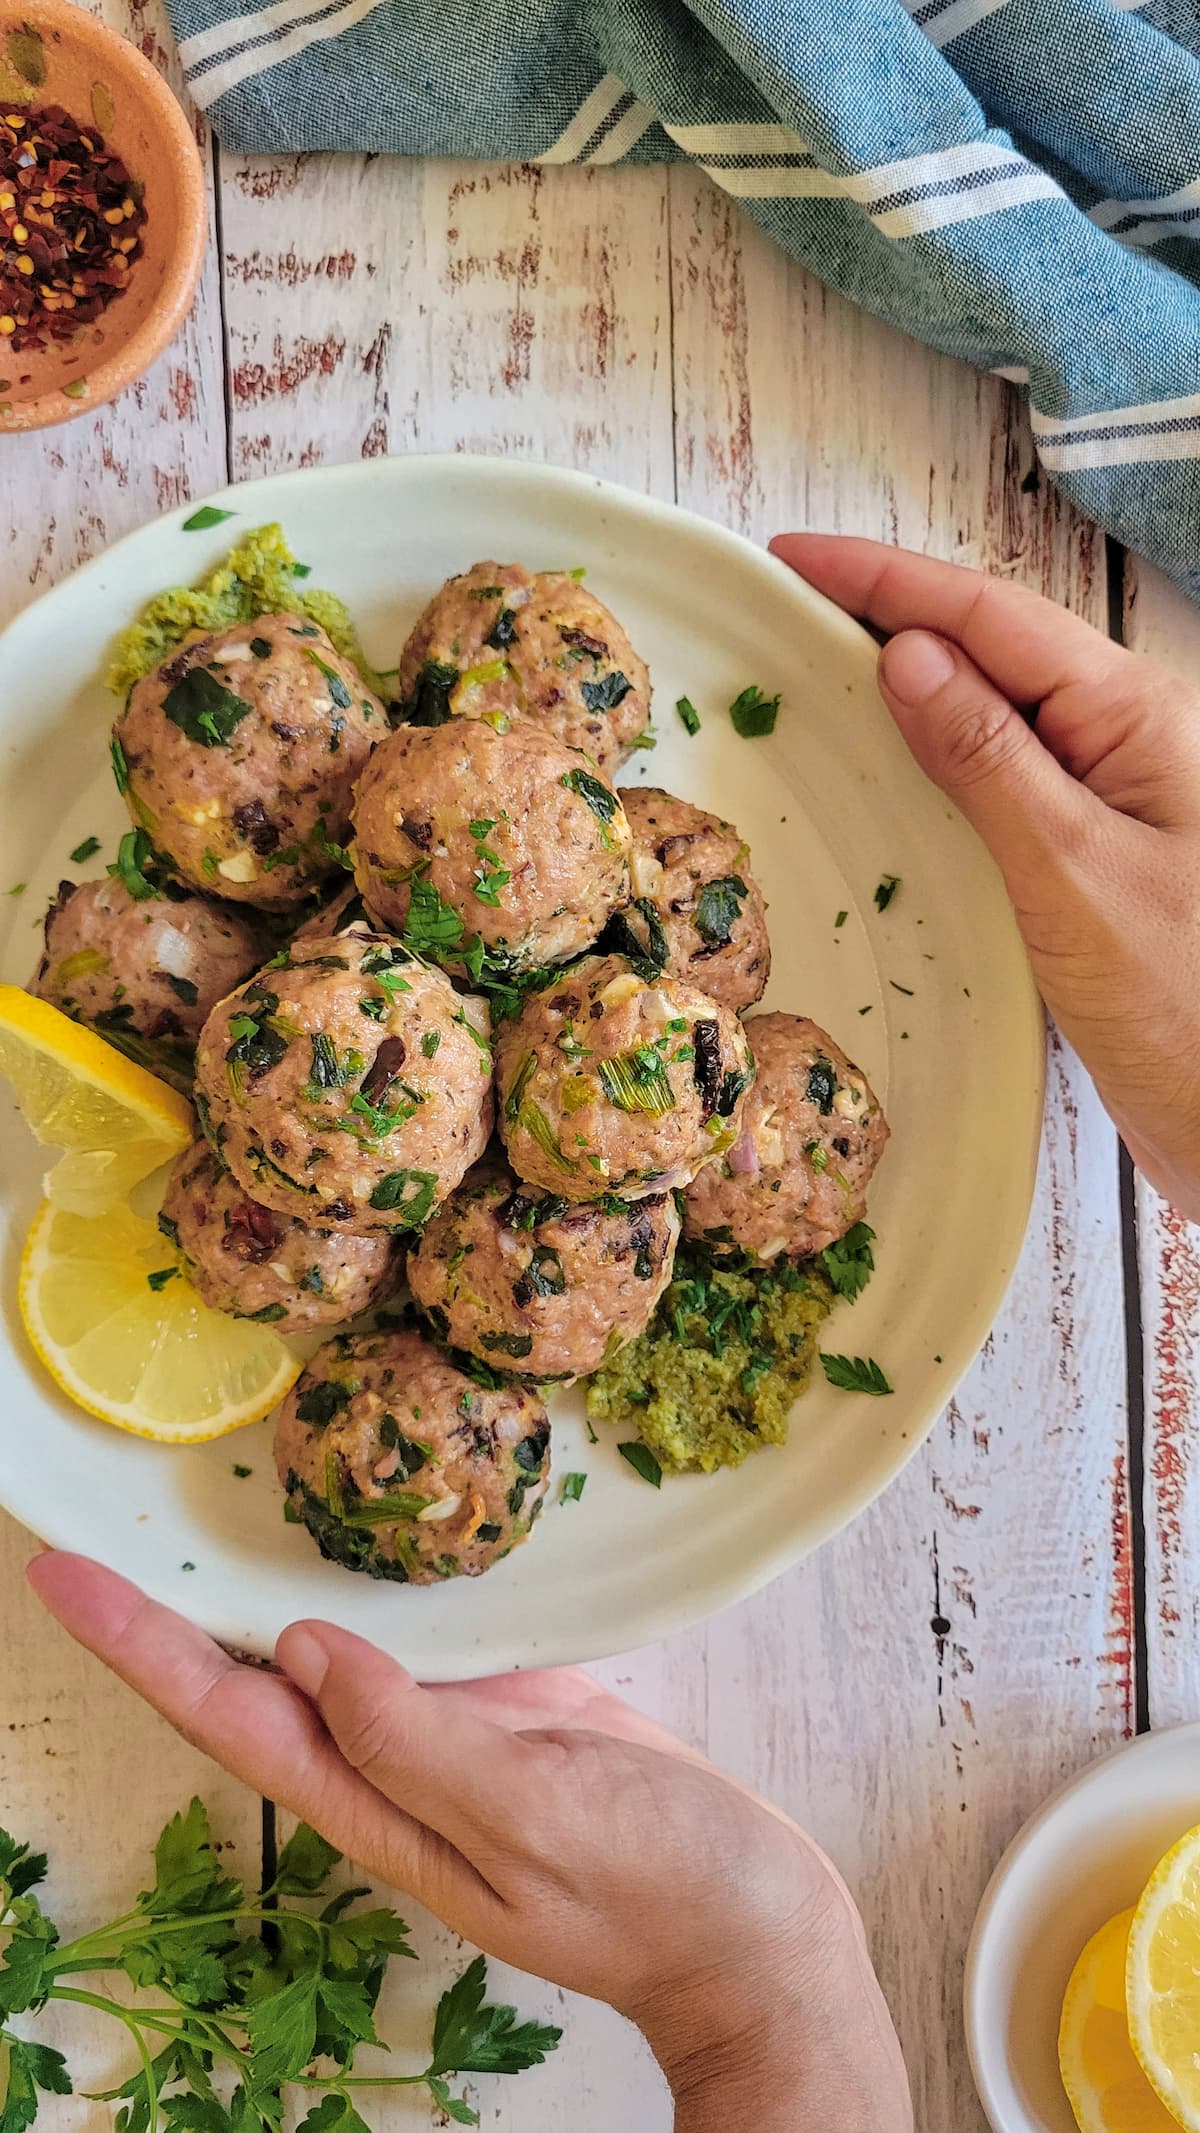 hands around a plate of meatballs on pesto, garnished with fresh chopped parsley and lemon